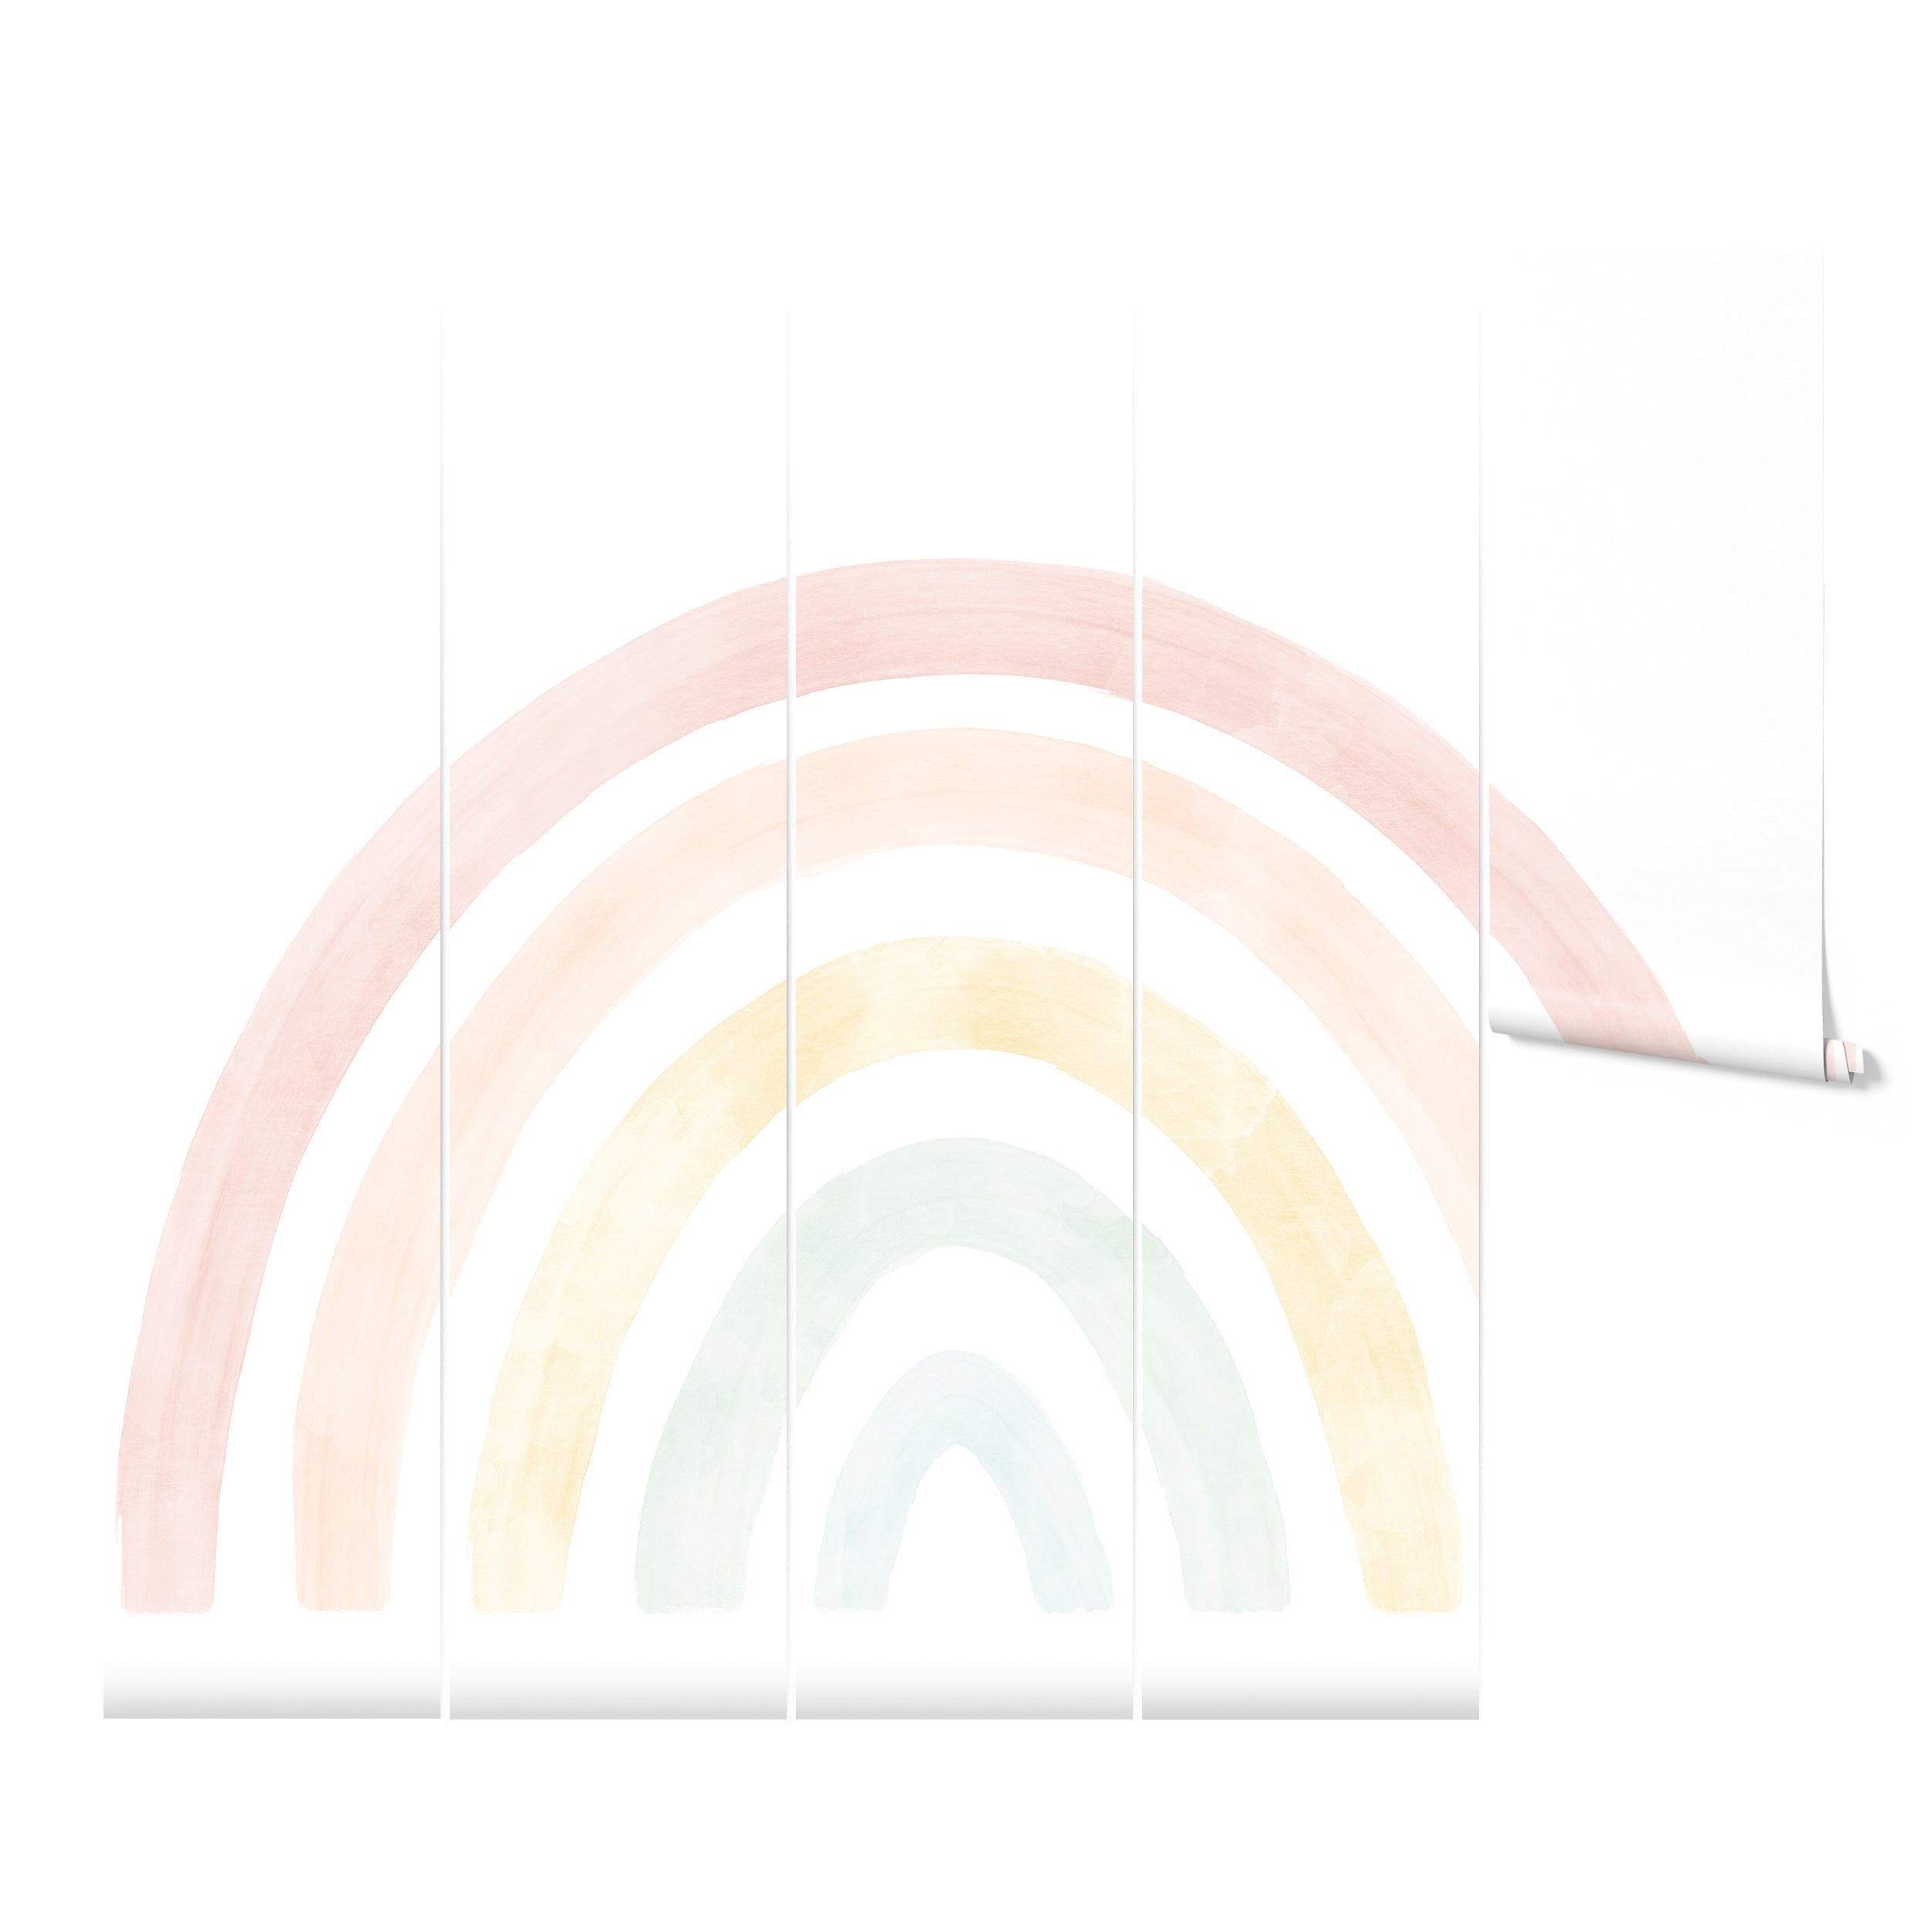 An image of the Pastel Rainbow Wallpaper Mural - Lyra, rolled up, indicating the design before installation, with delicate pastel bands forming a harmonious rainbow.